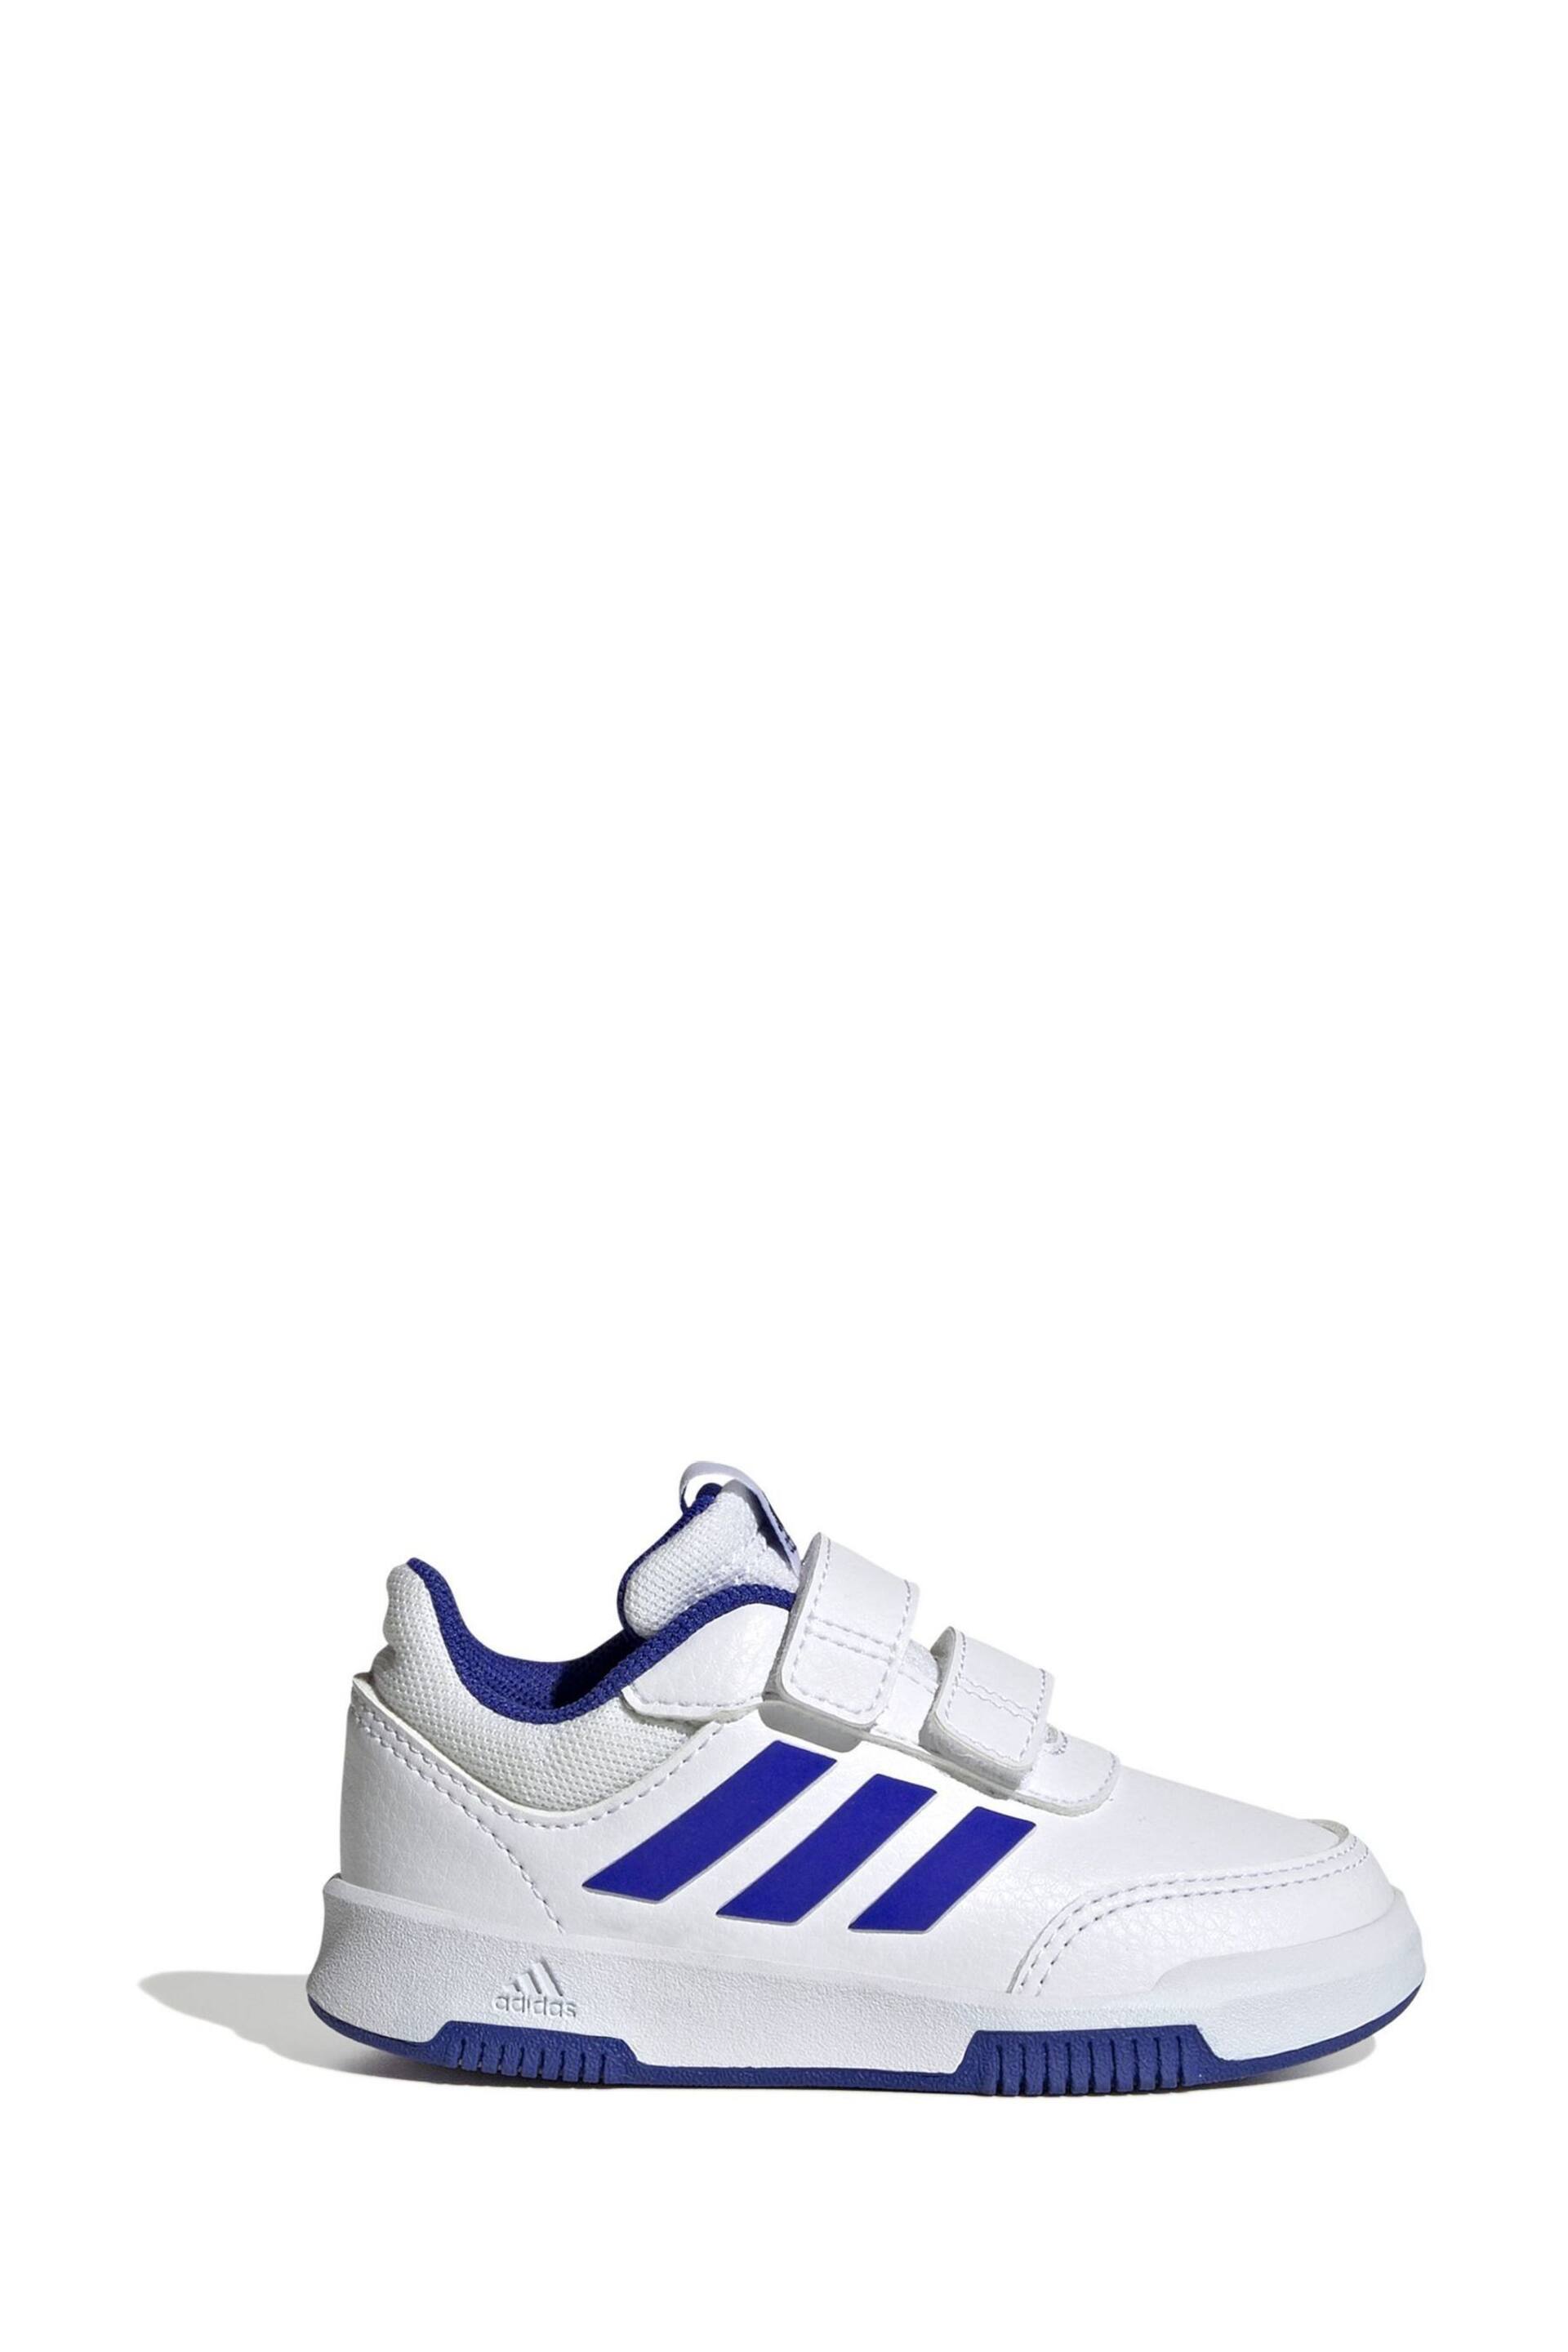 adidas White/Blue Tensaur Hook and Loop Shoes - Image 1 of 9